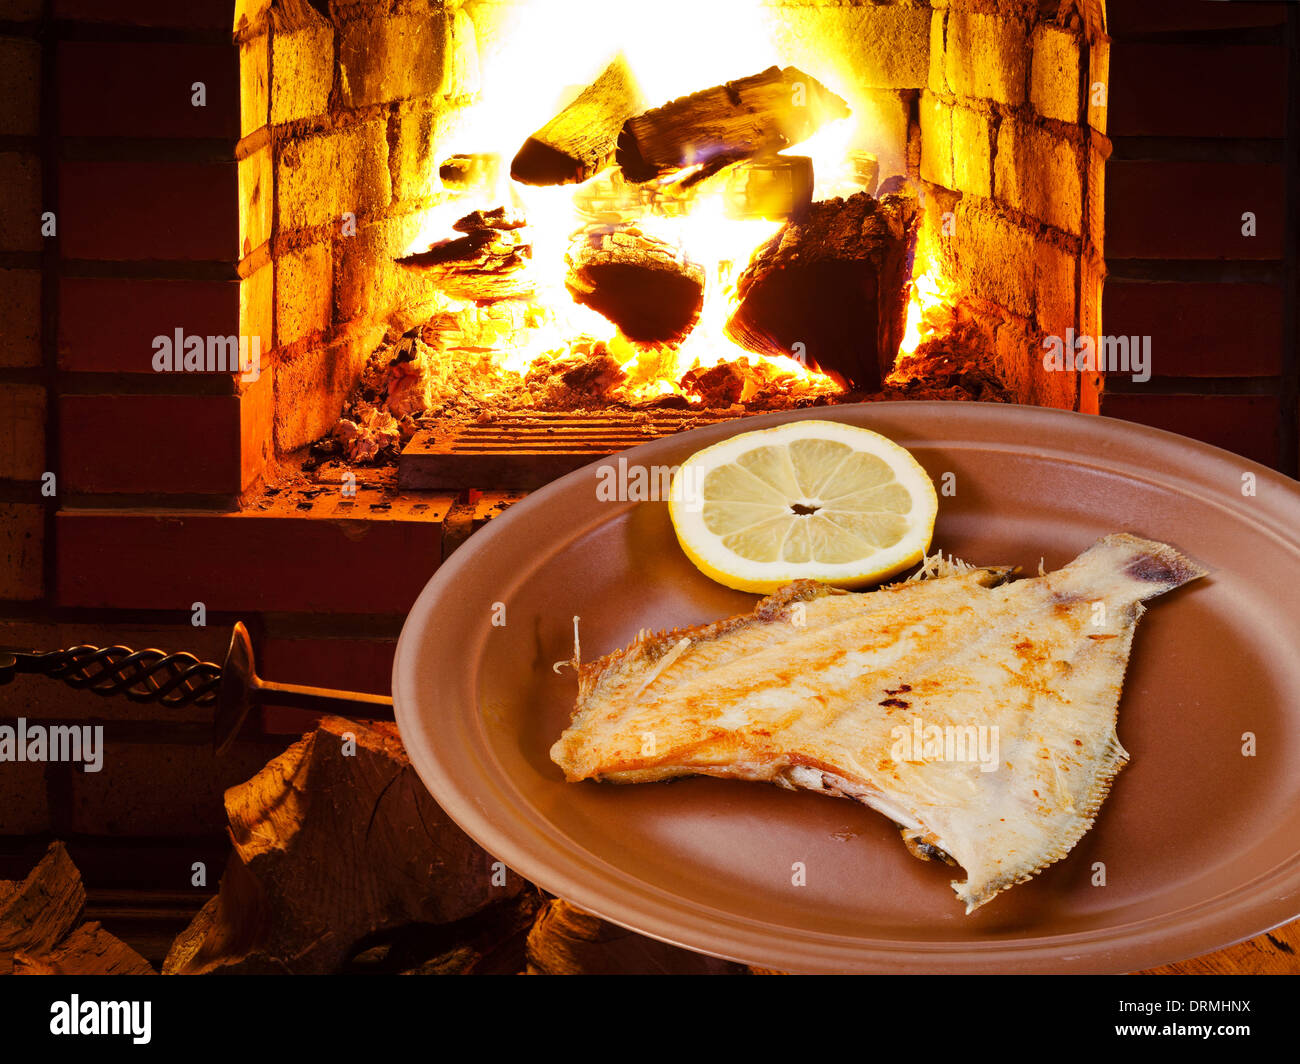 fried sole fish on plate and open fire in wood burning oven Stock Photo